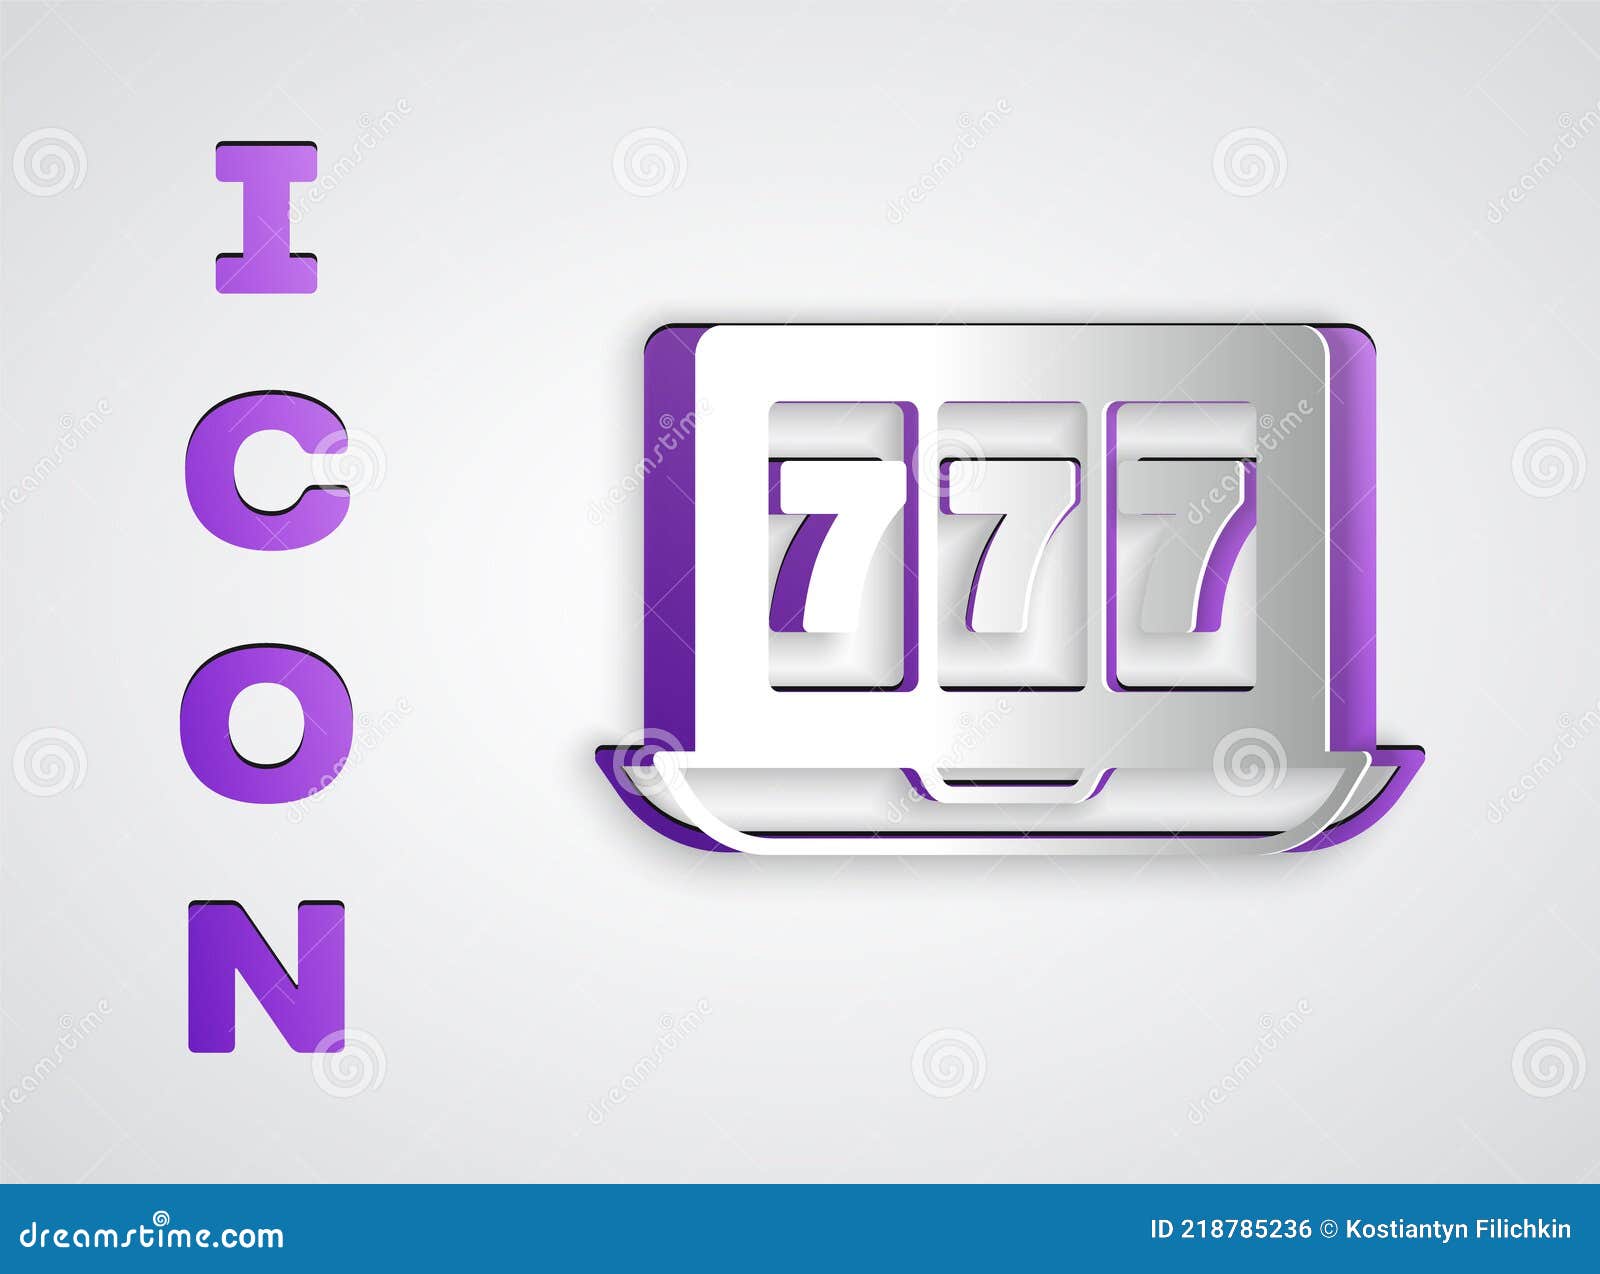 Paper Cut Online Slot Machine with Lucky Sevens Jackpot Icon Isolated on  Grey Background. Online Casino Stock Vector - Illustration of gambling,  play: 218785236